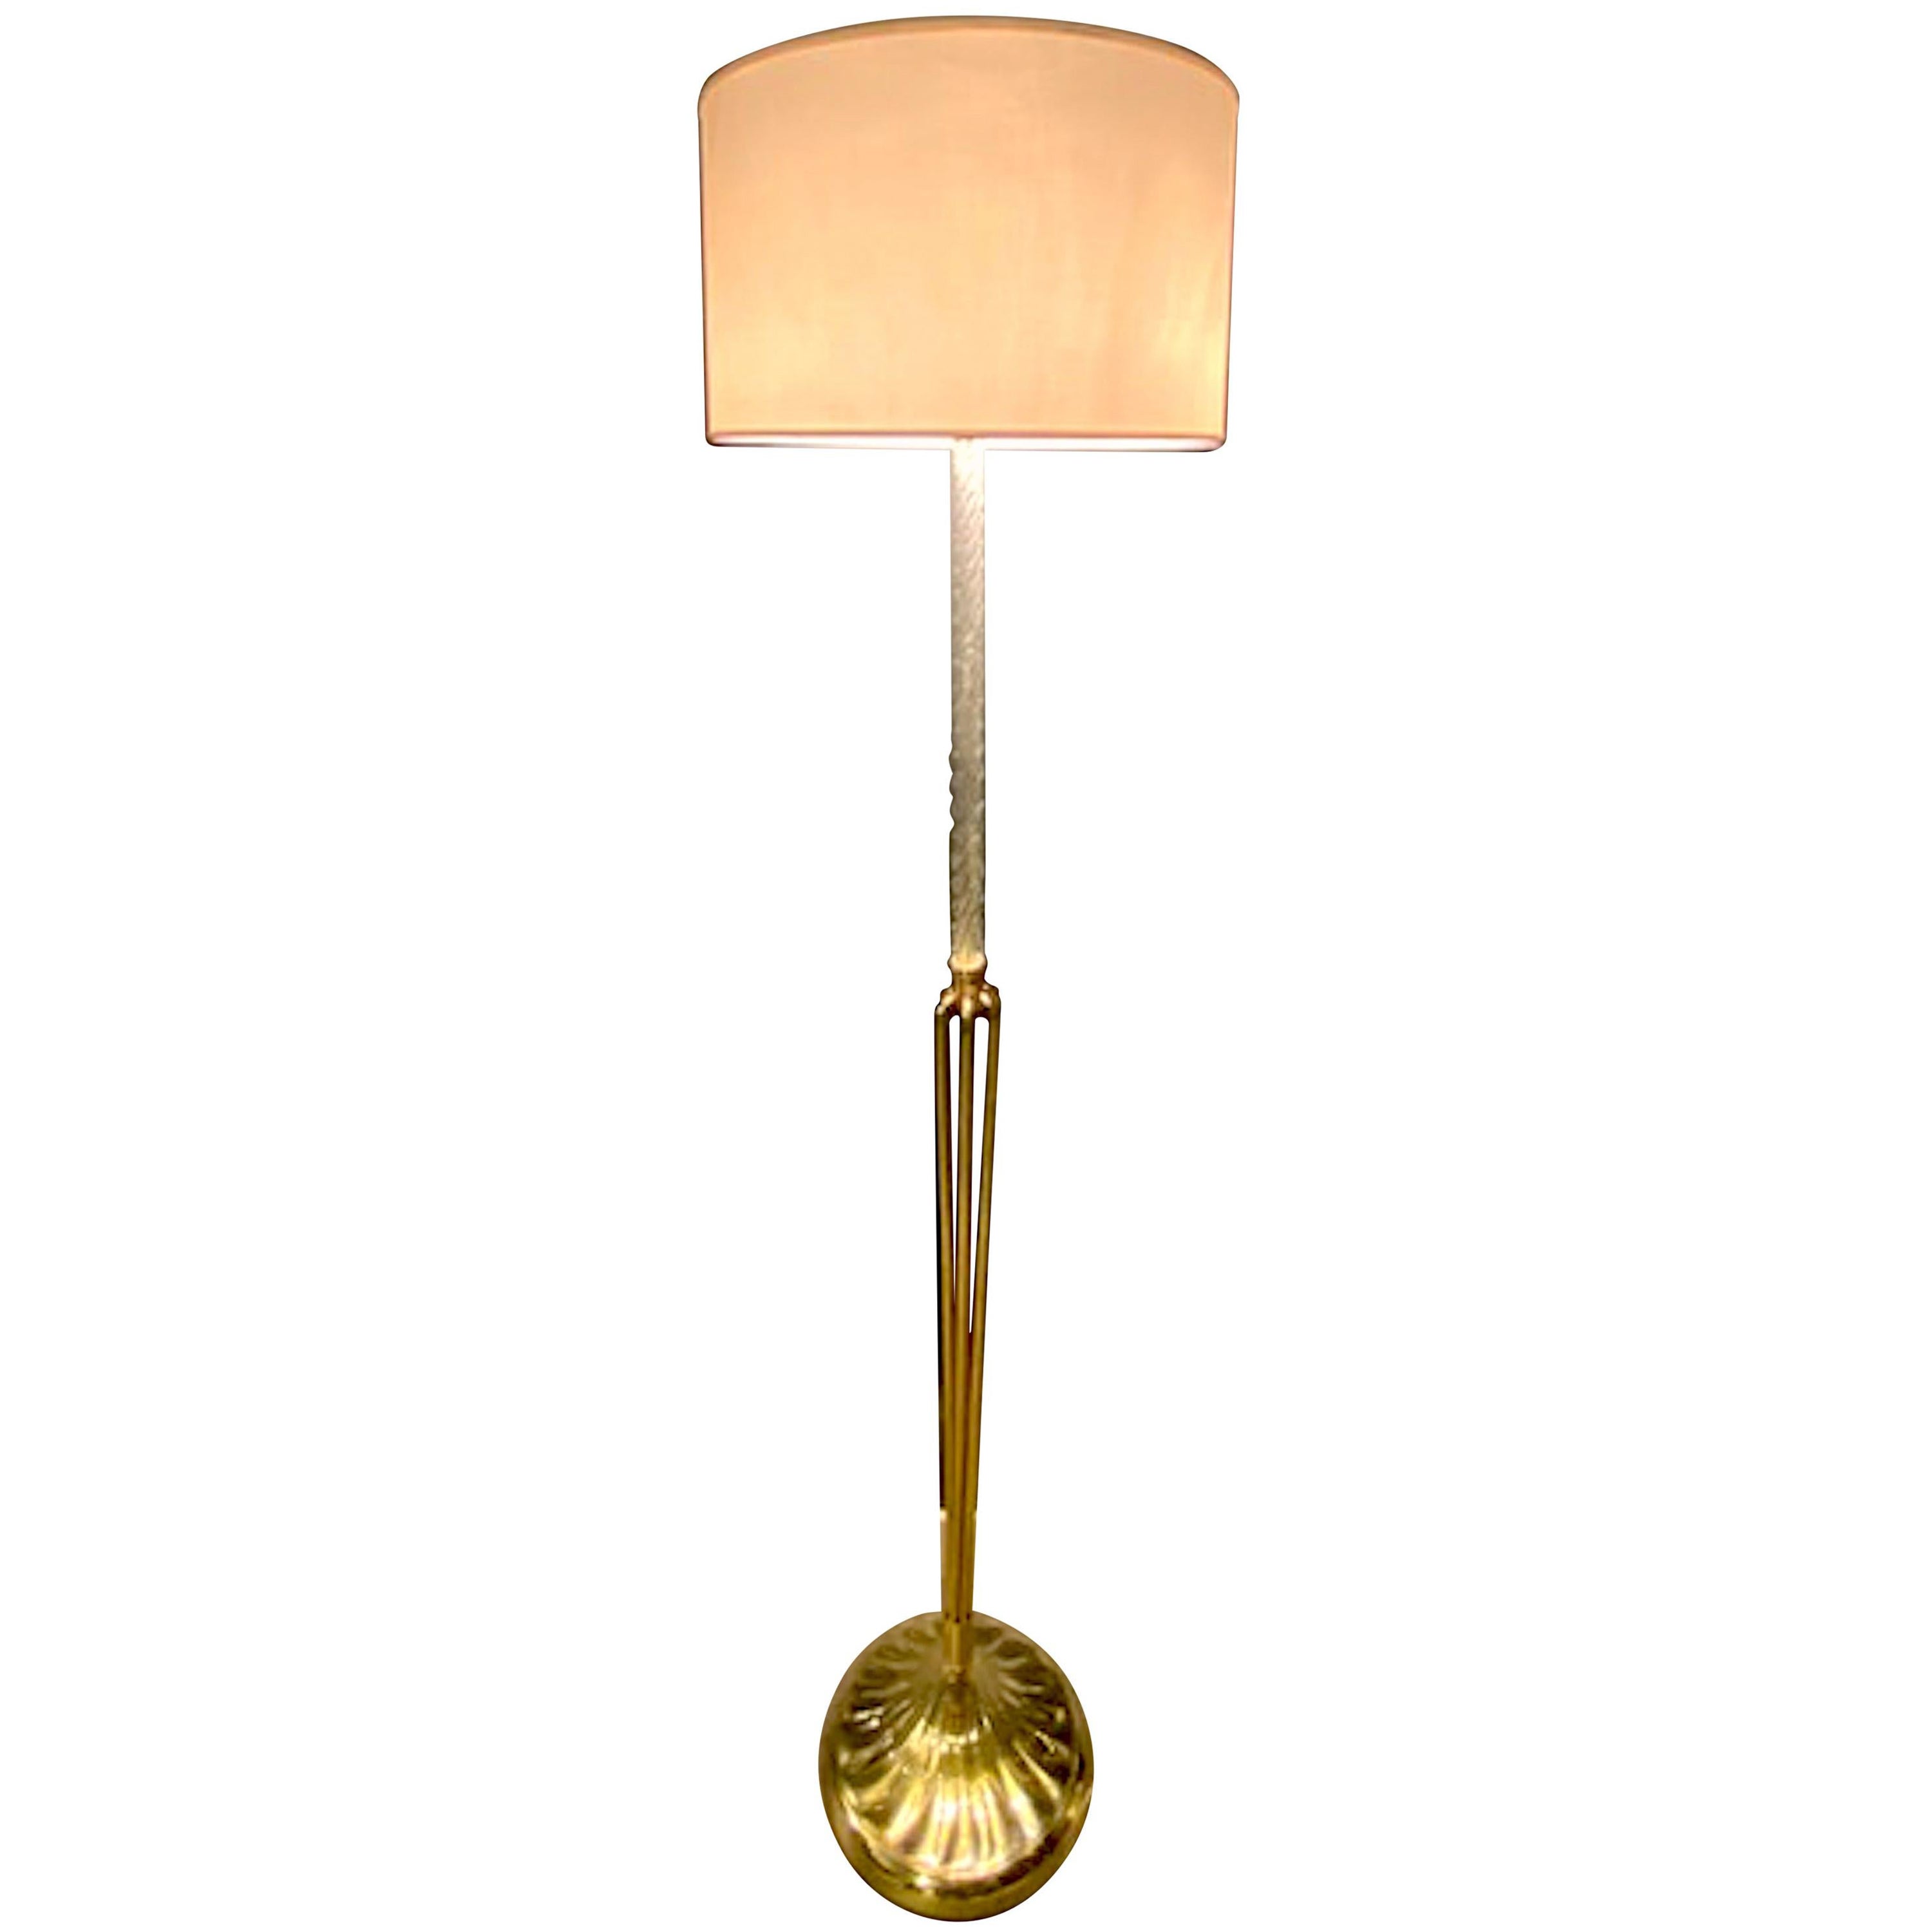 Italian Twisted Glass Cane and Brass 1930s Floor Lamp For Sale